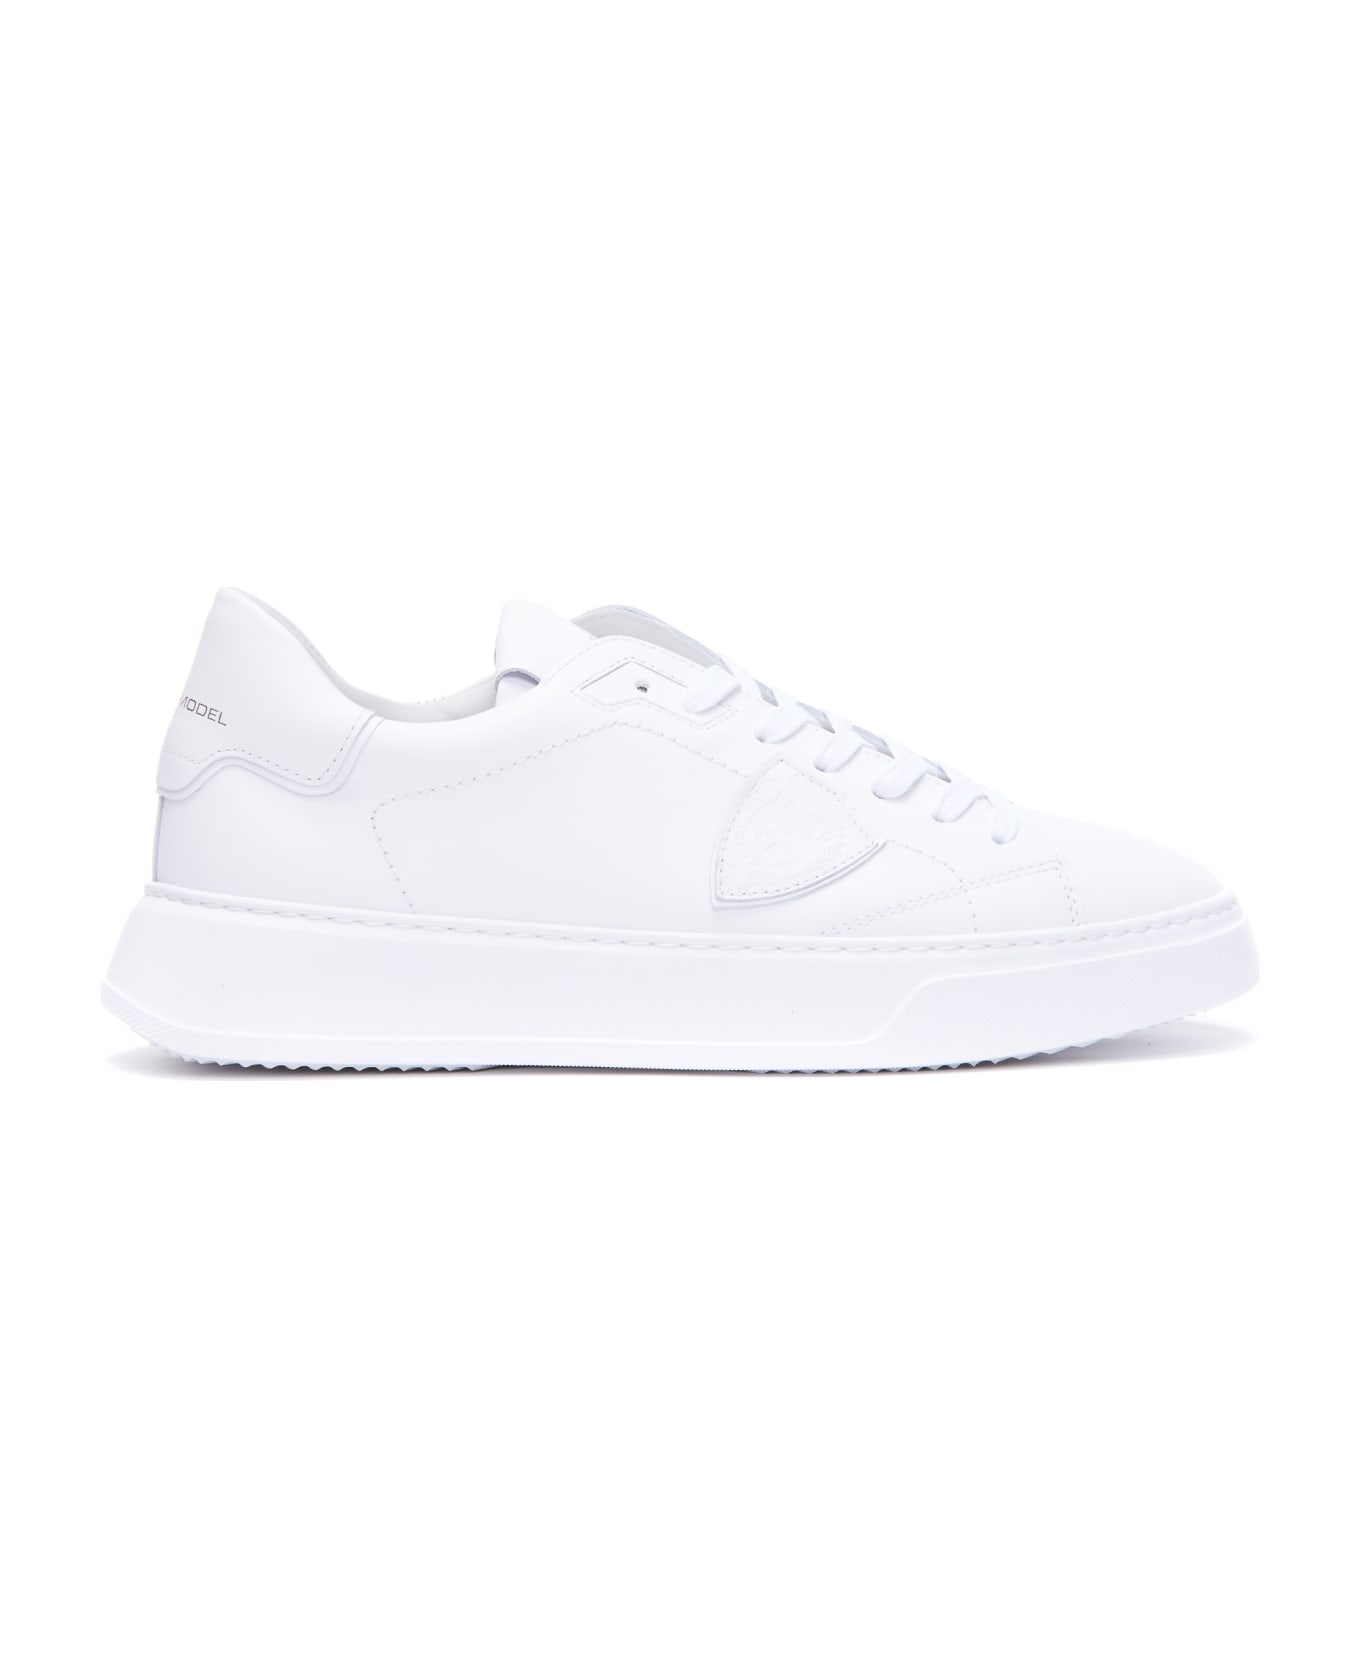 Philippe Model Temple Low Sneakers - White スニーカー